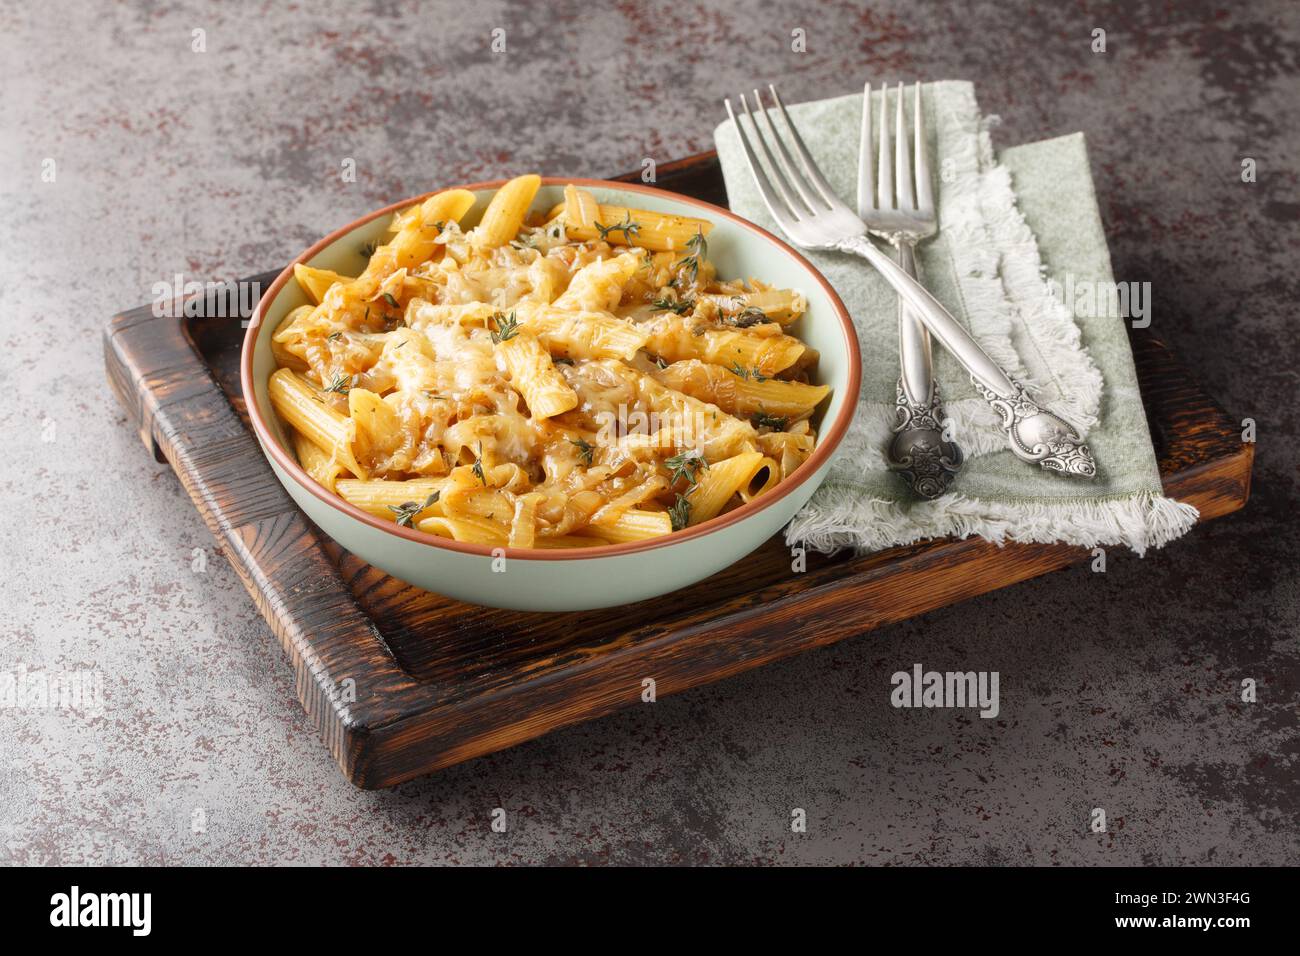 French Onion Style Creamy Pasta with caramelized onions, thyme, garlic and gruyere cheese close-up on a bowl on a wooden board. Horizontal Stock Photo